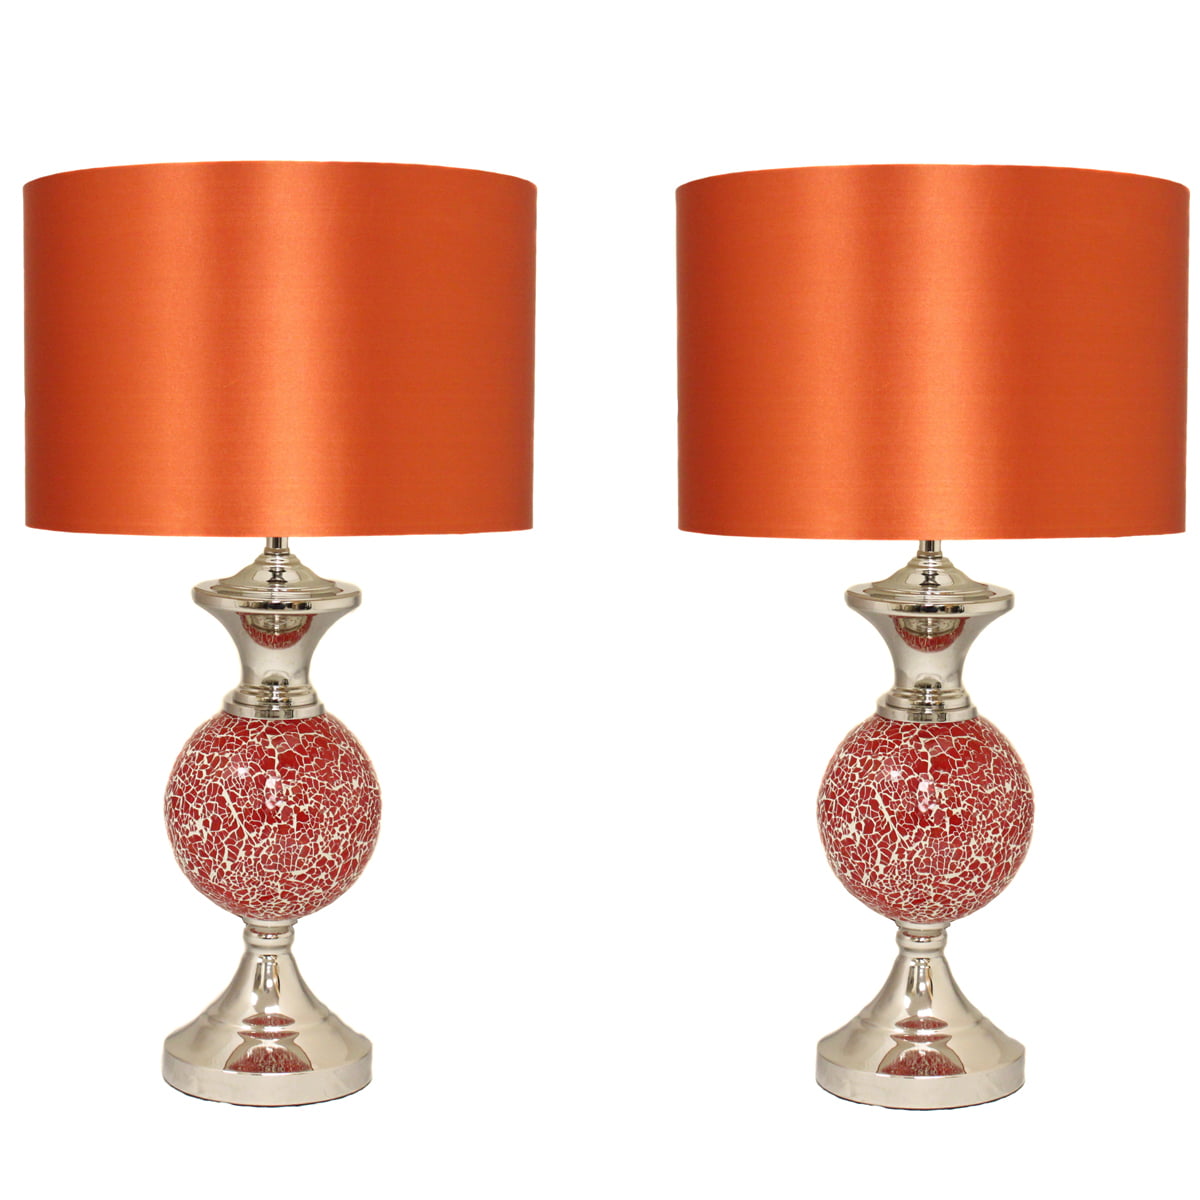 Mosaic Ed Glass Table Lamp Set, Red Mosaic Glass Table Lamp